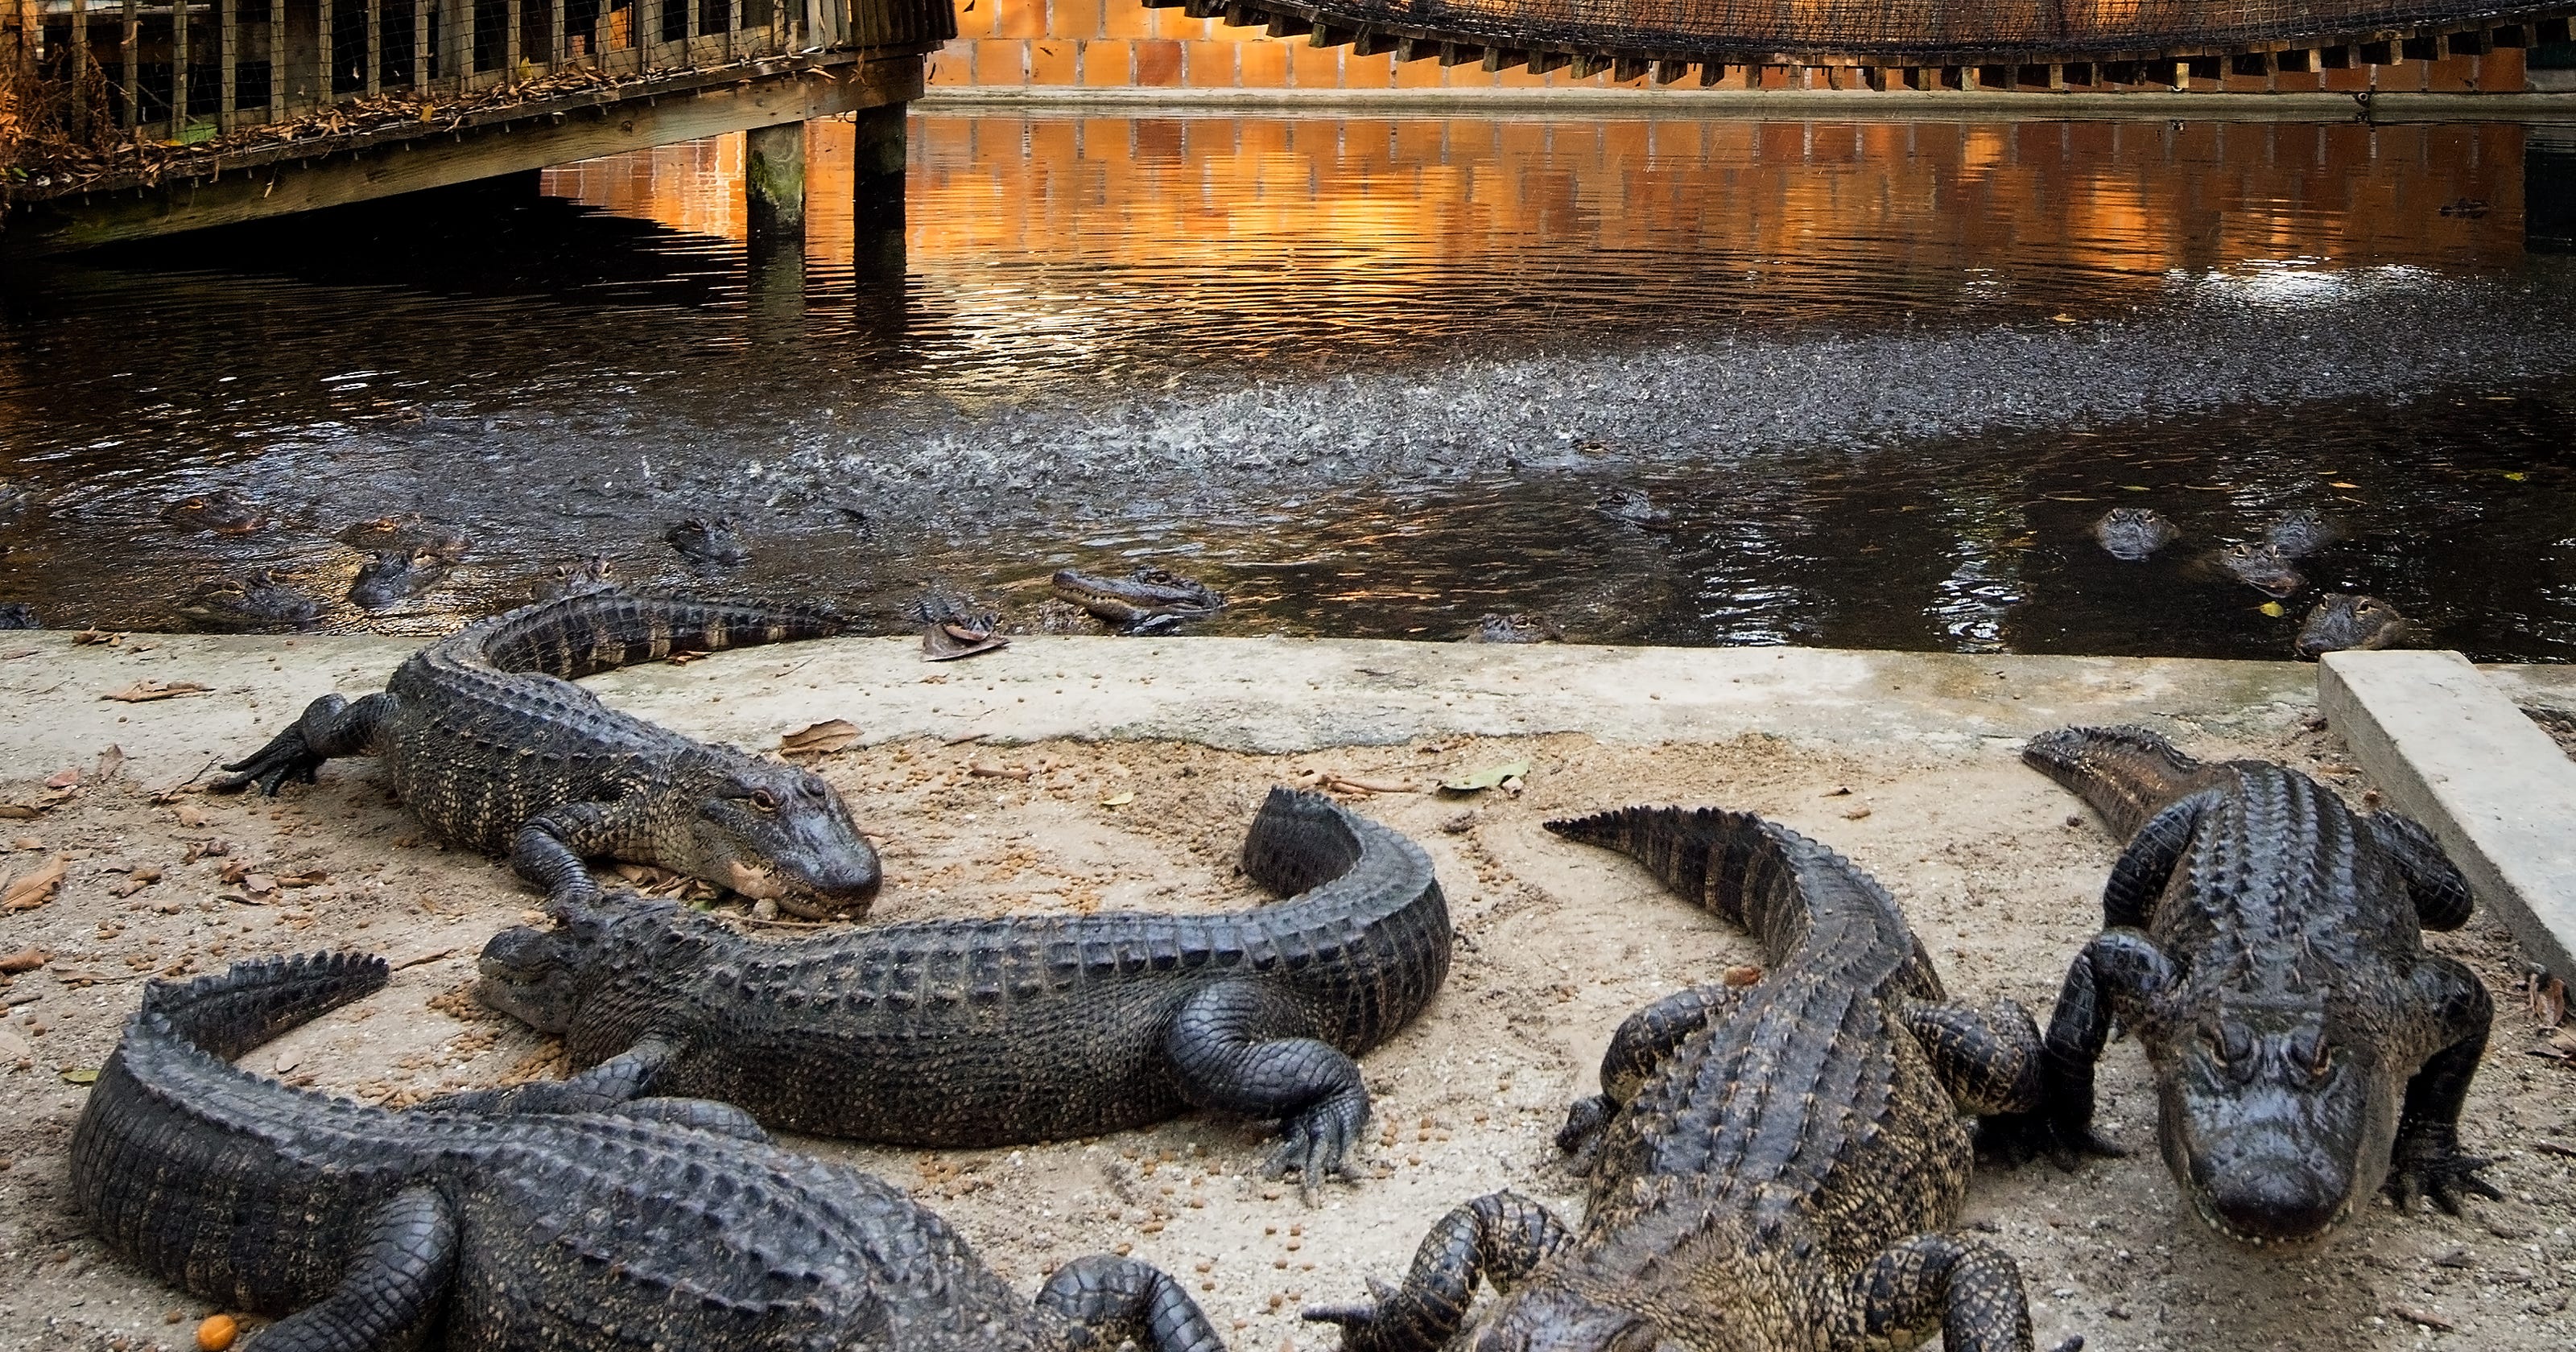 Alligators: 11 places in Southwest Florida where you're guaranteed to